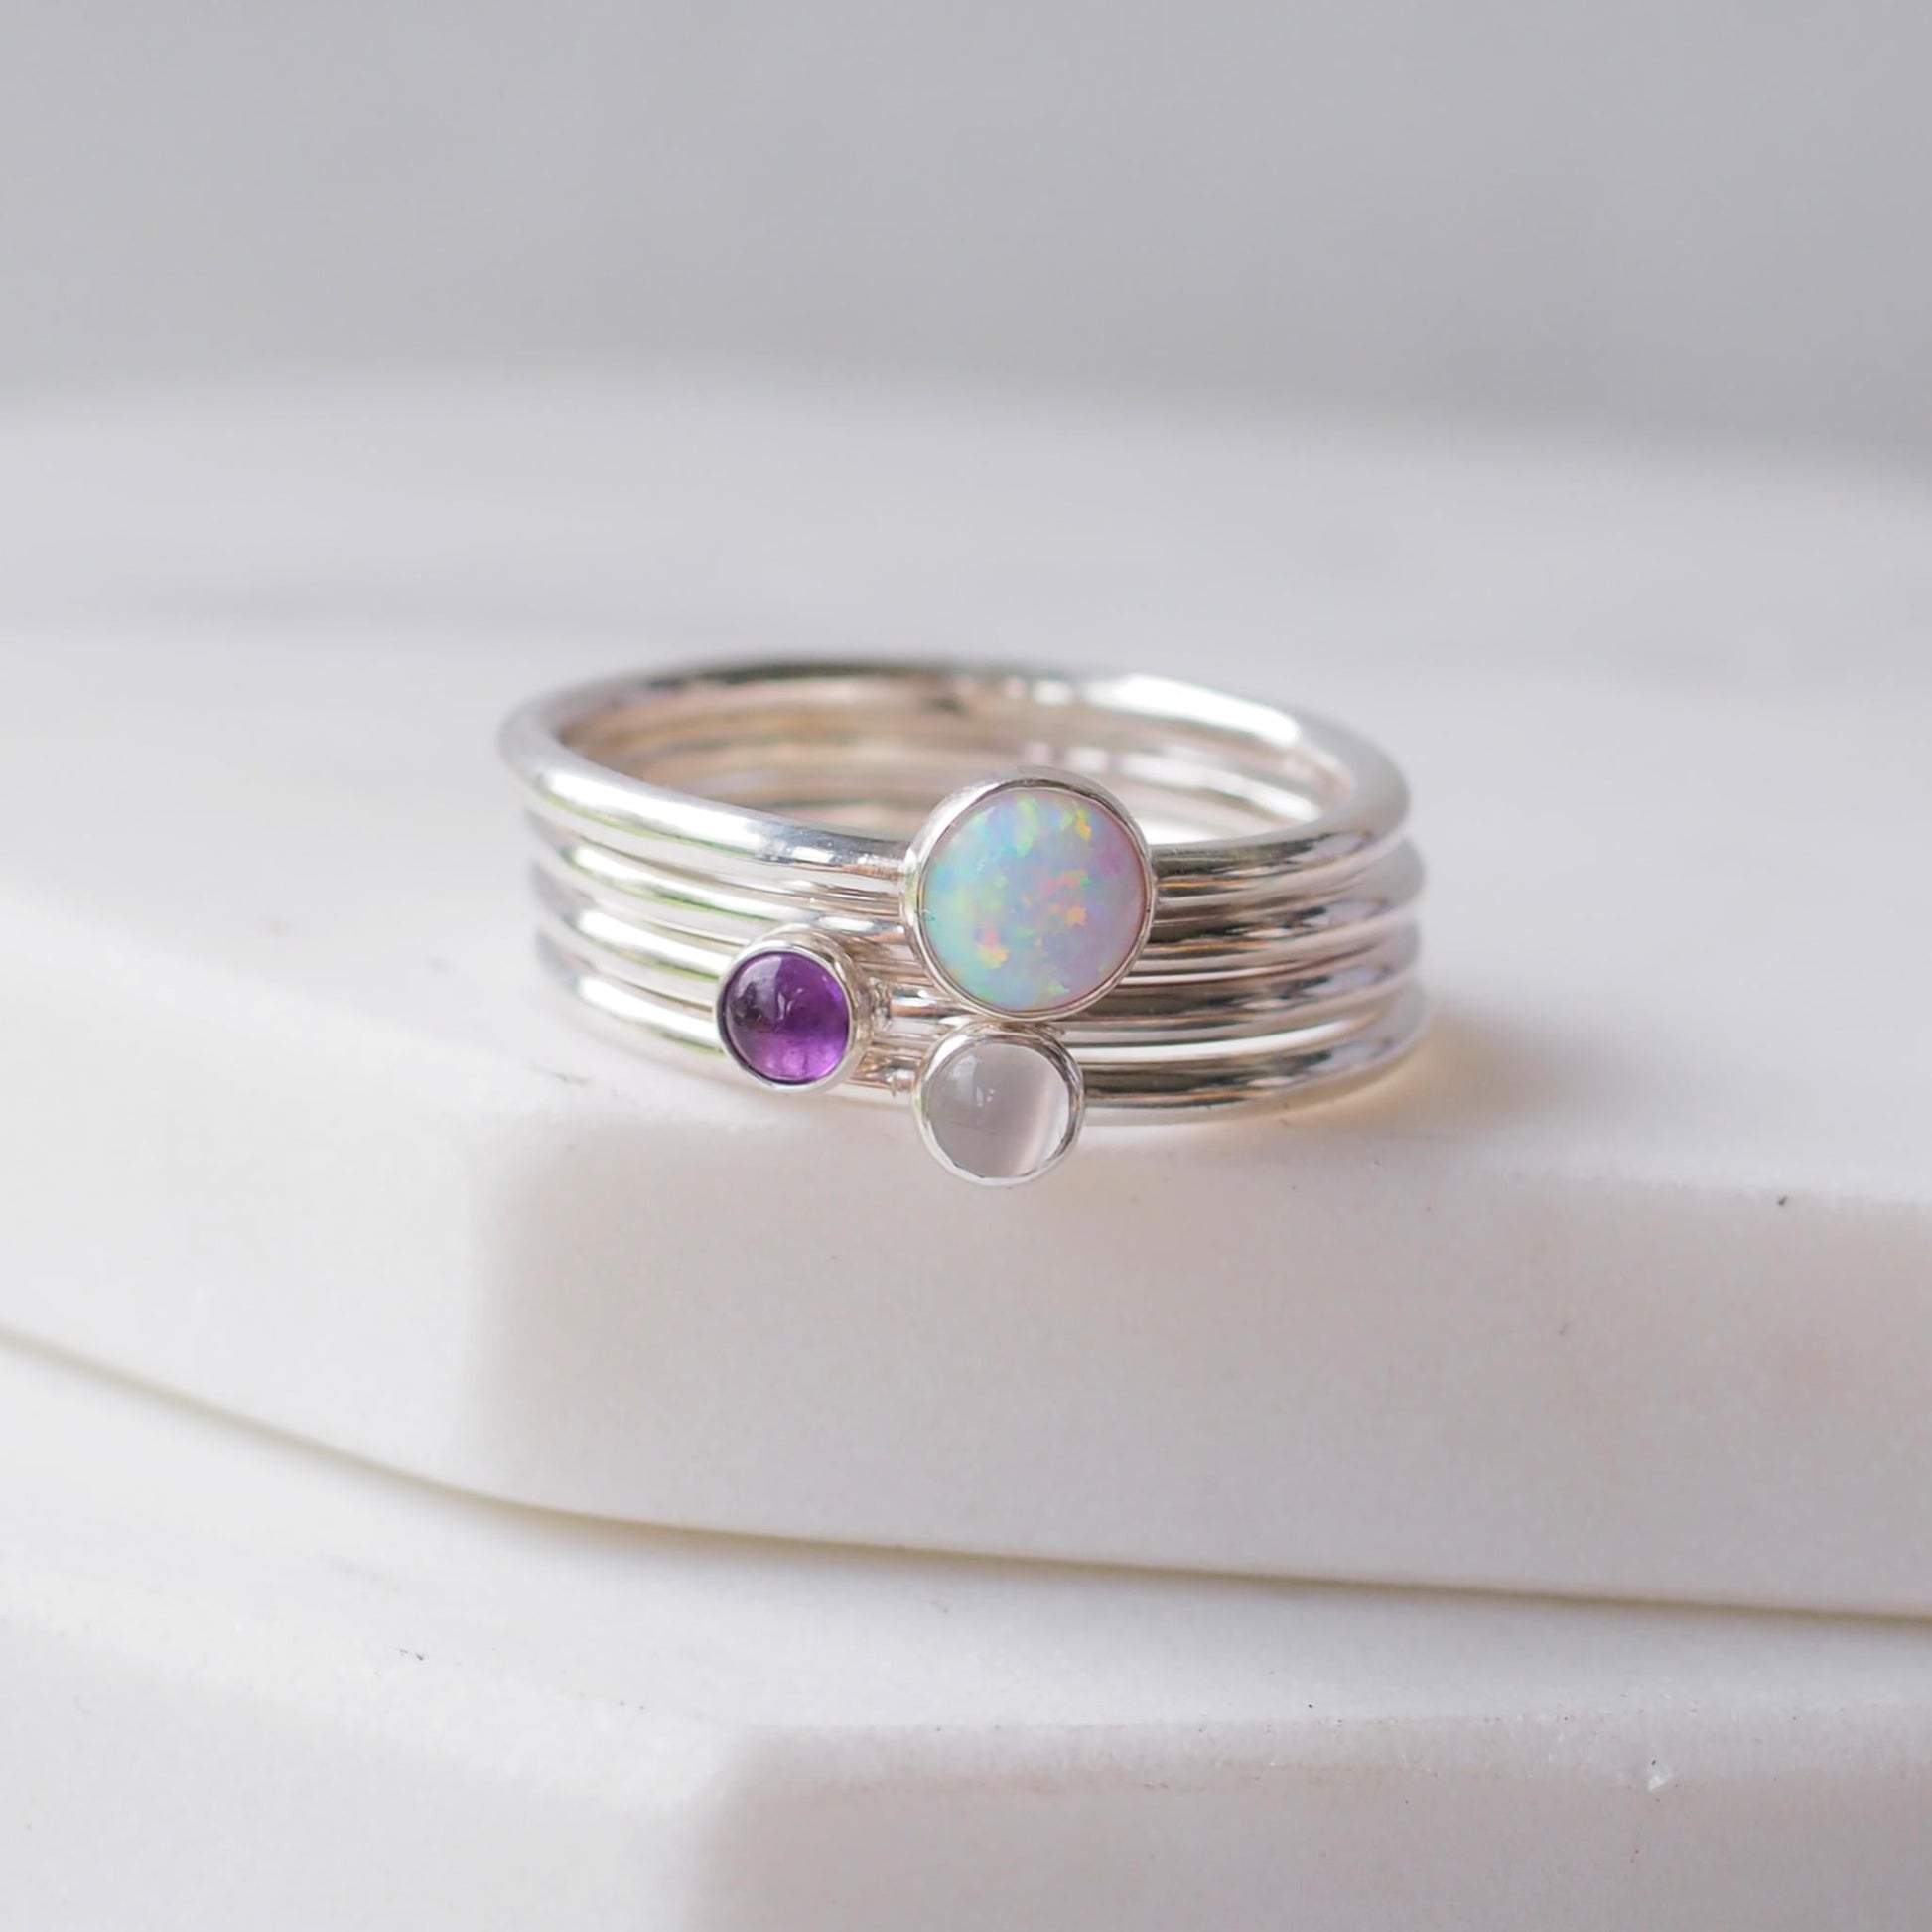 Three silver rings with lal Opal, Moonstone and Amethyst gemstones. Birthstones for February, June and October. Handmade to your ring size by maram jewellery in Scotland , UK